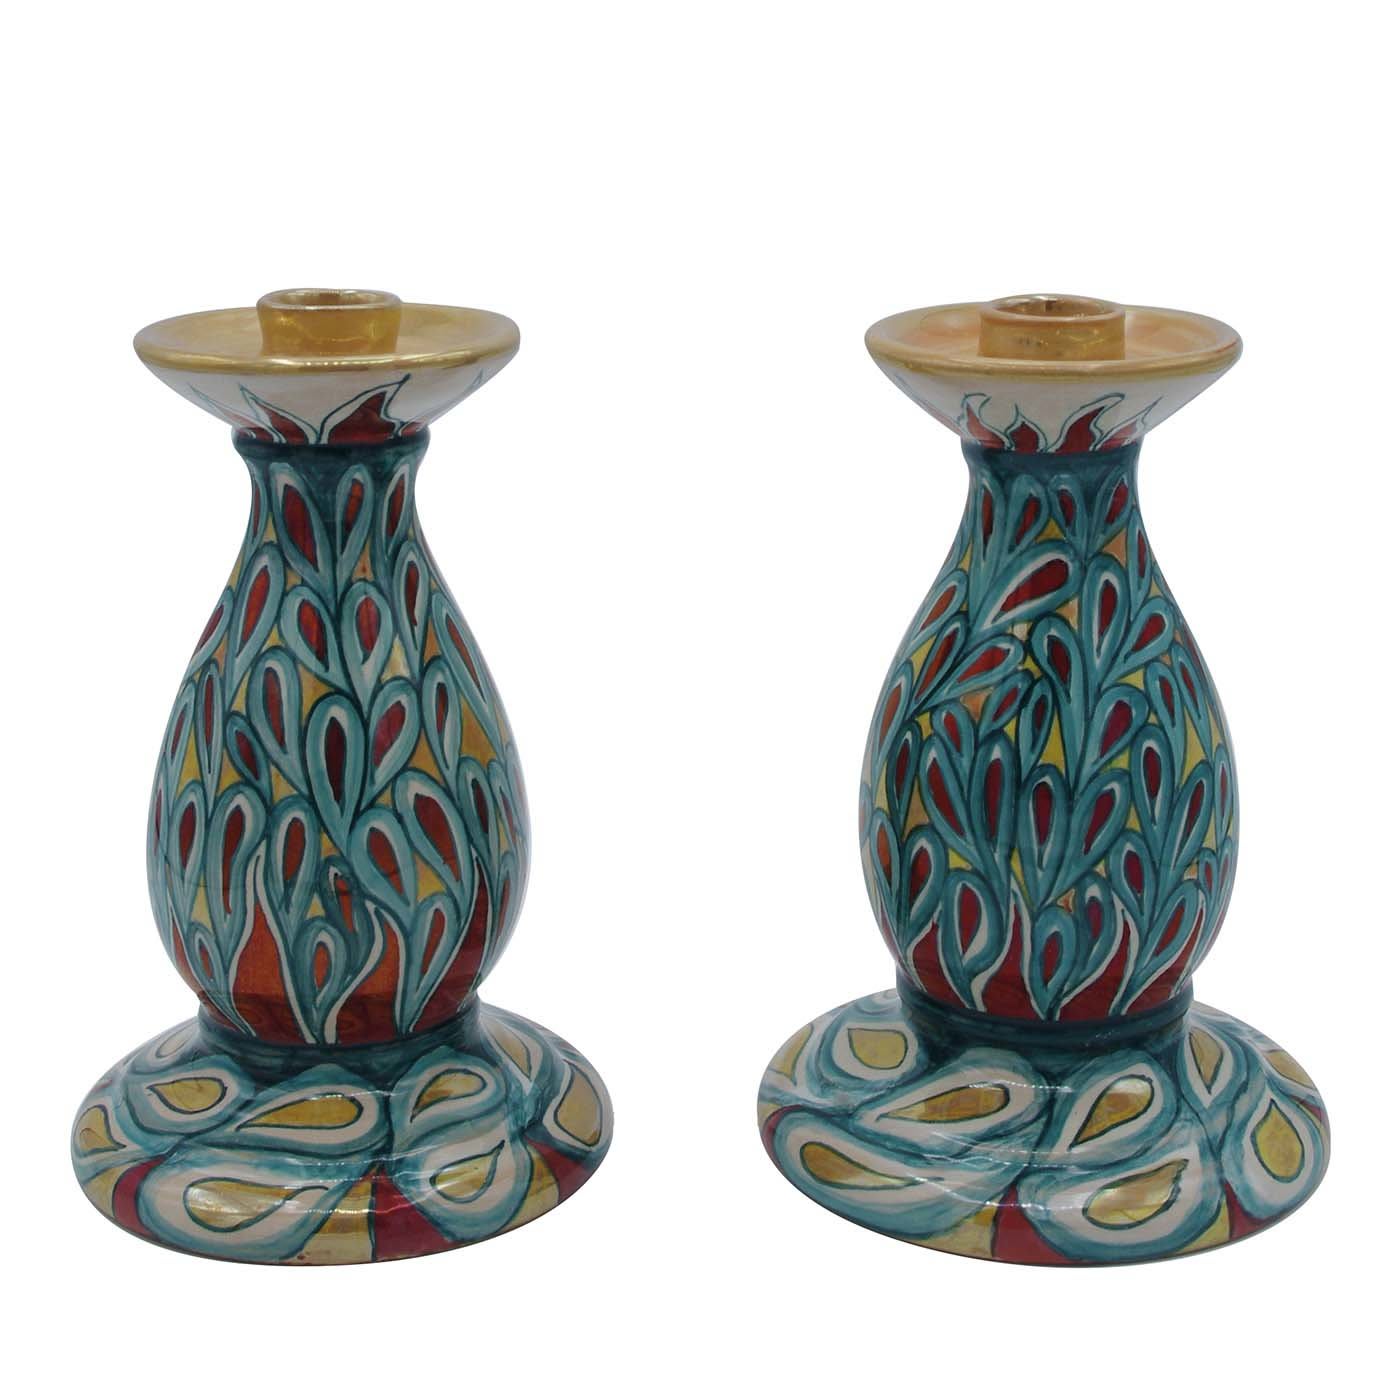 Pair of Candle Holders - Iridescenze